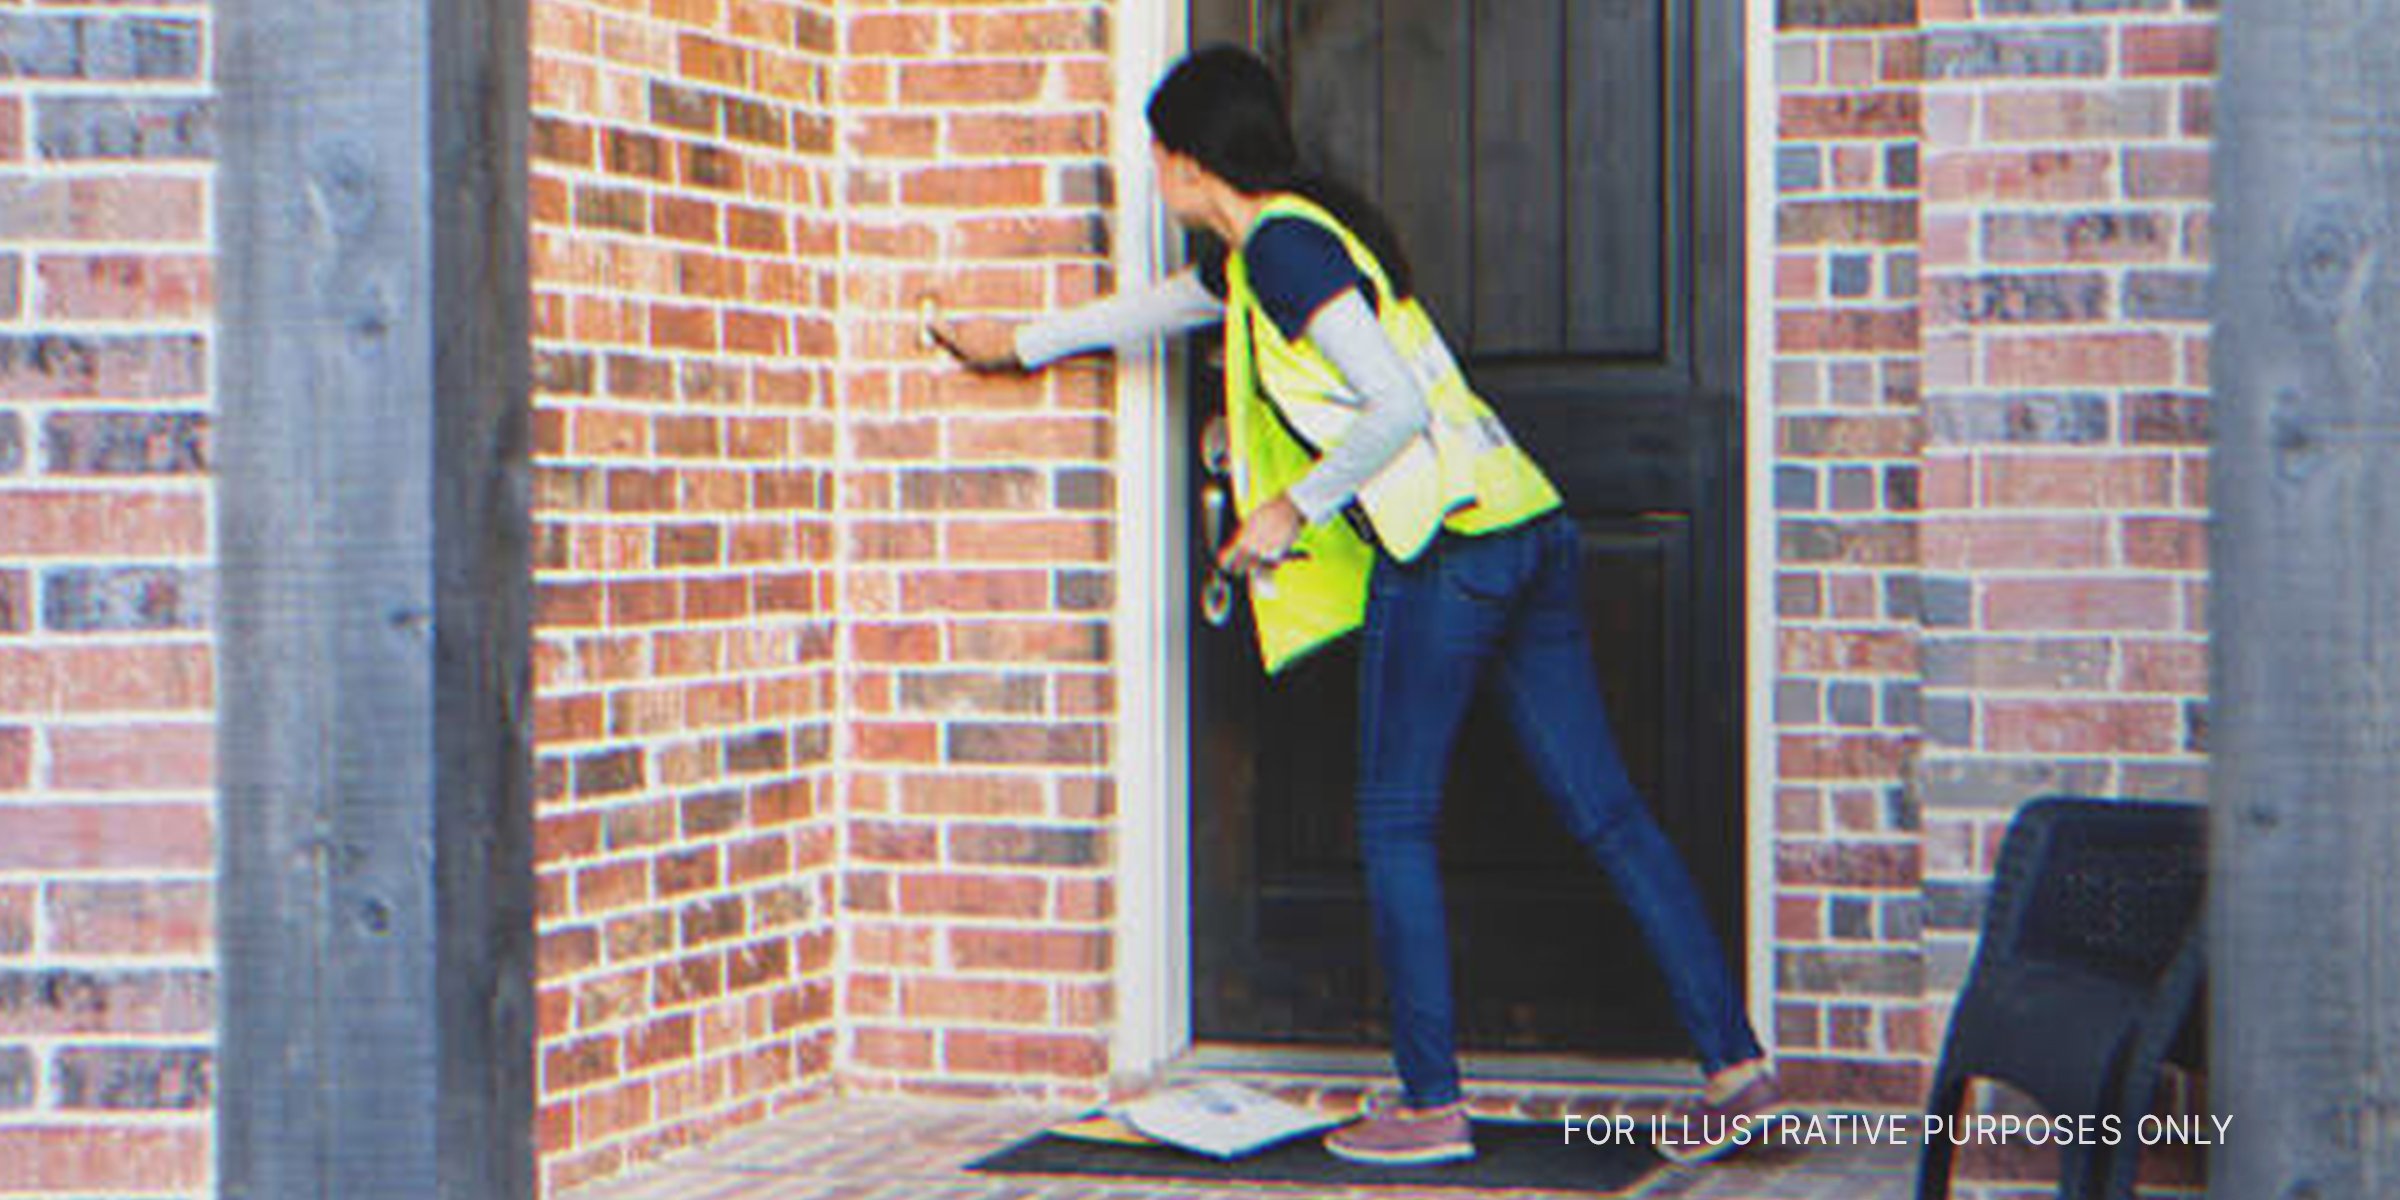 Delivery Woman Pressing The Doorbell. | Source: Getty Images